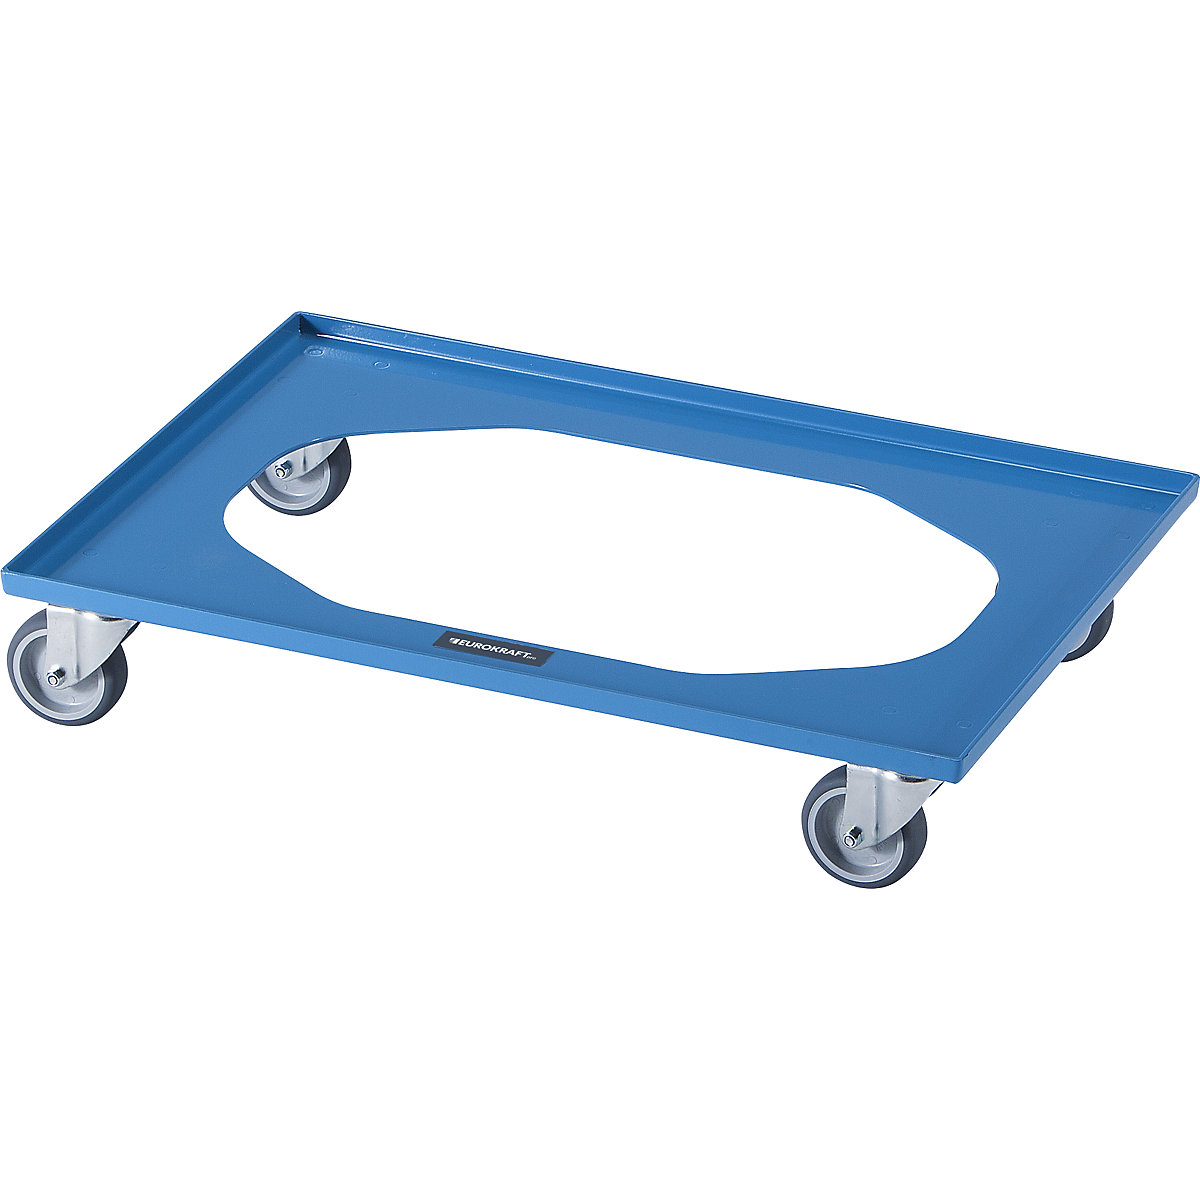 NEO transport dolly – eurokraft pro, for Euro formats 800 x 600 mm, max. load 250 kg, 5+ items-16